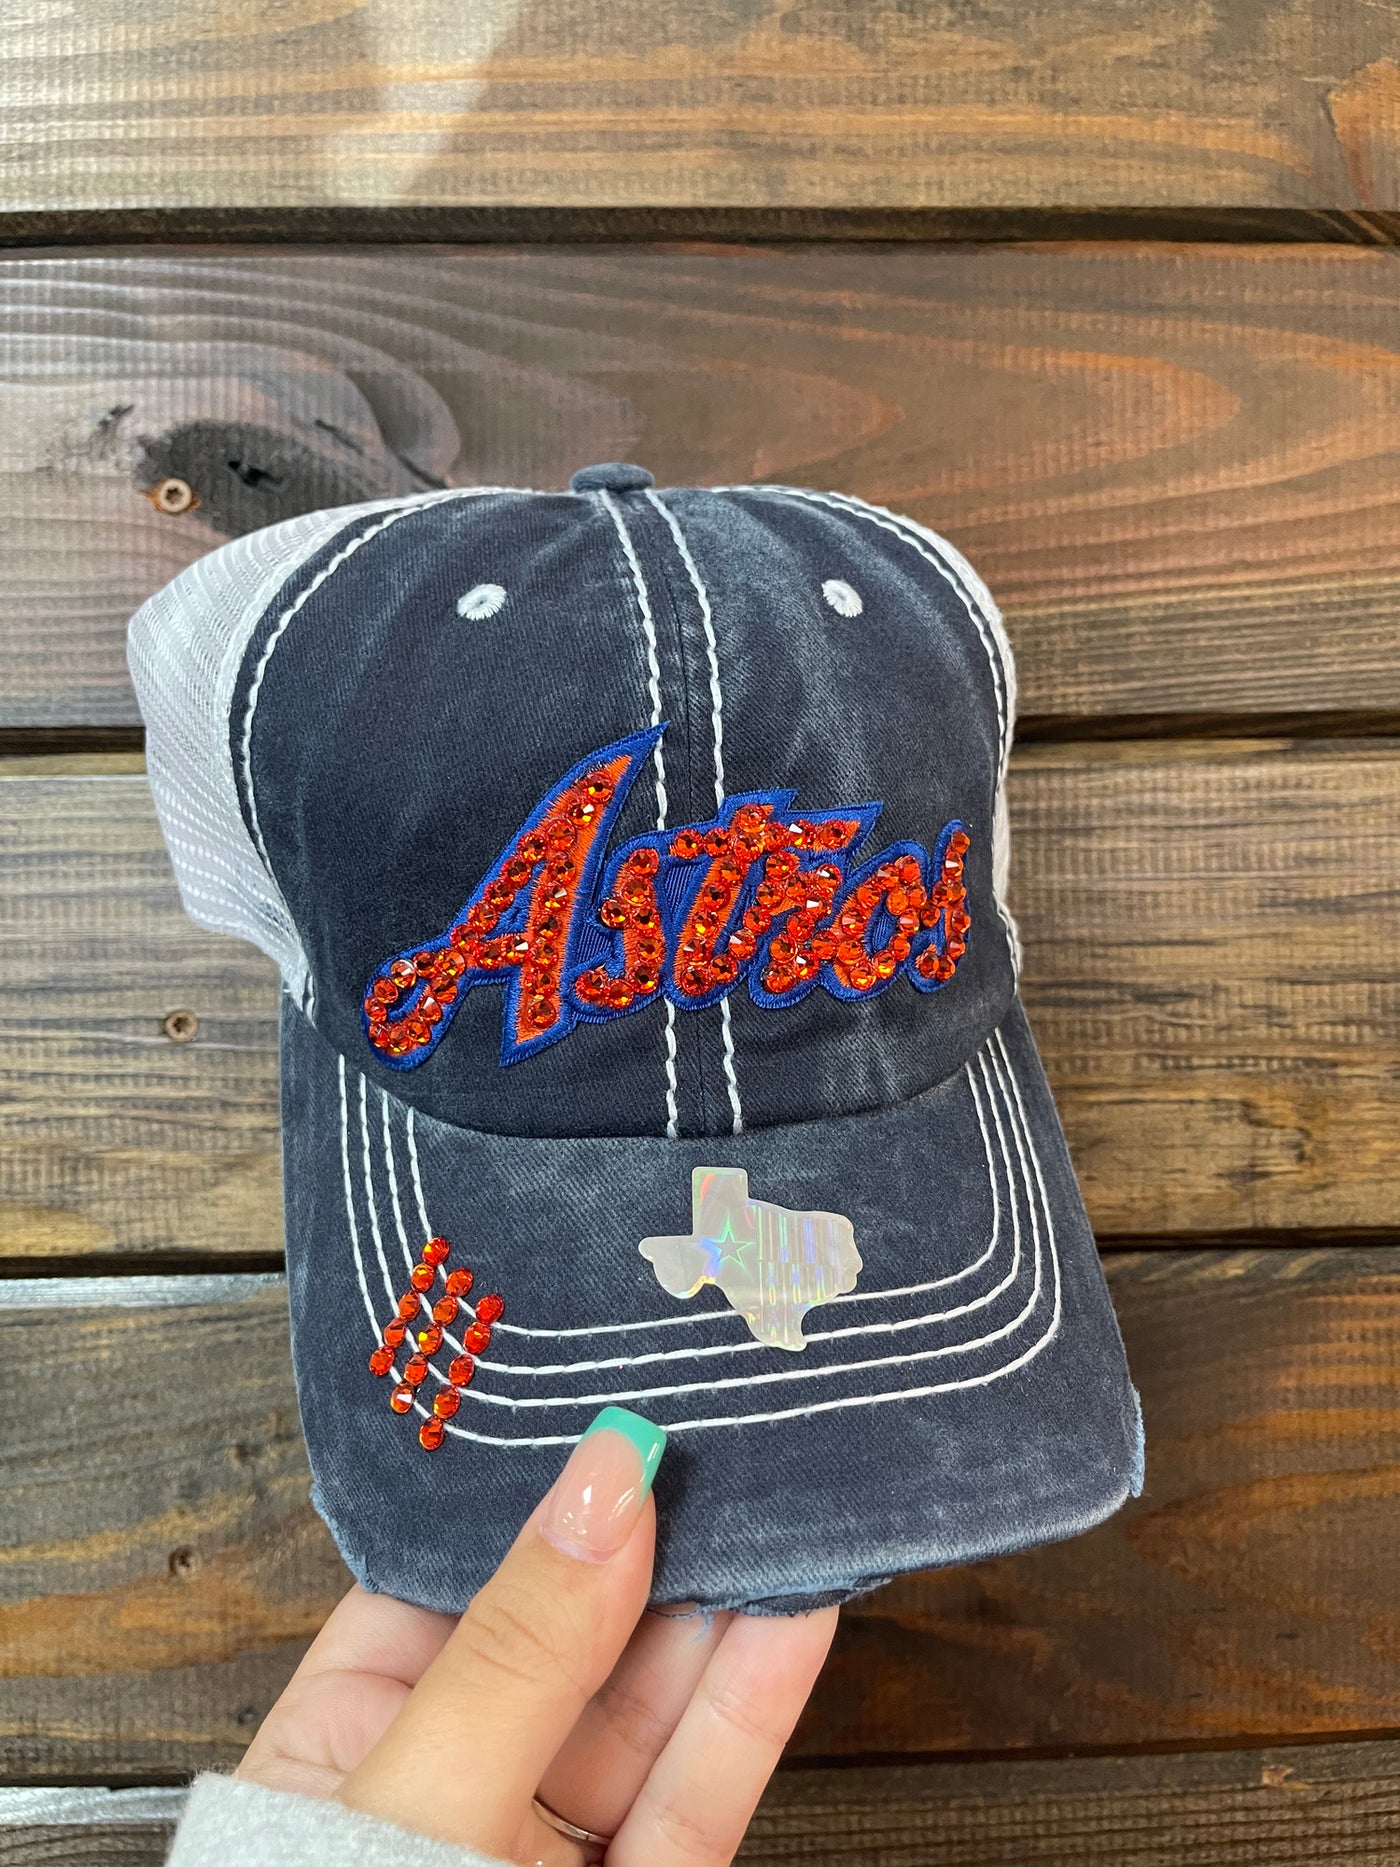 astros shirts and caps